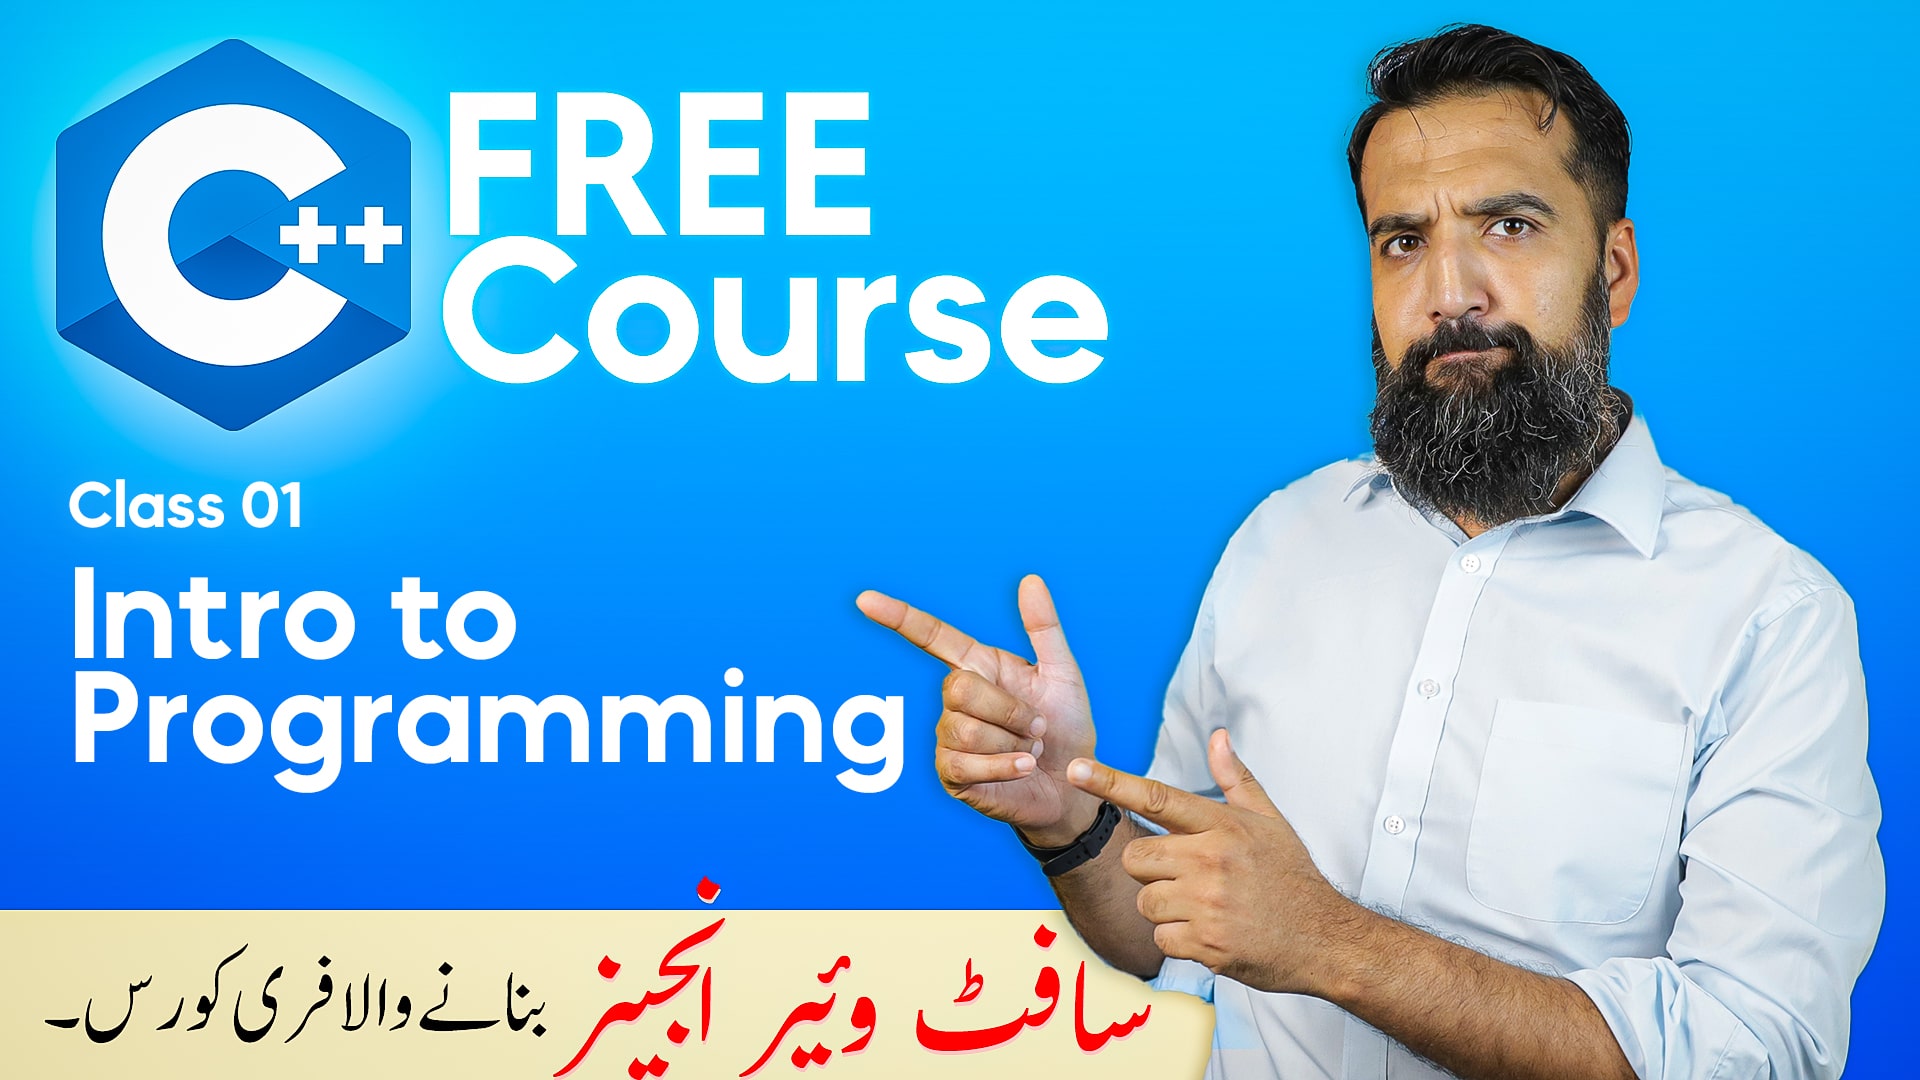  c-course-for-programmers-by-azad-chaiwala-64f859b8d2097078416219.jpg 